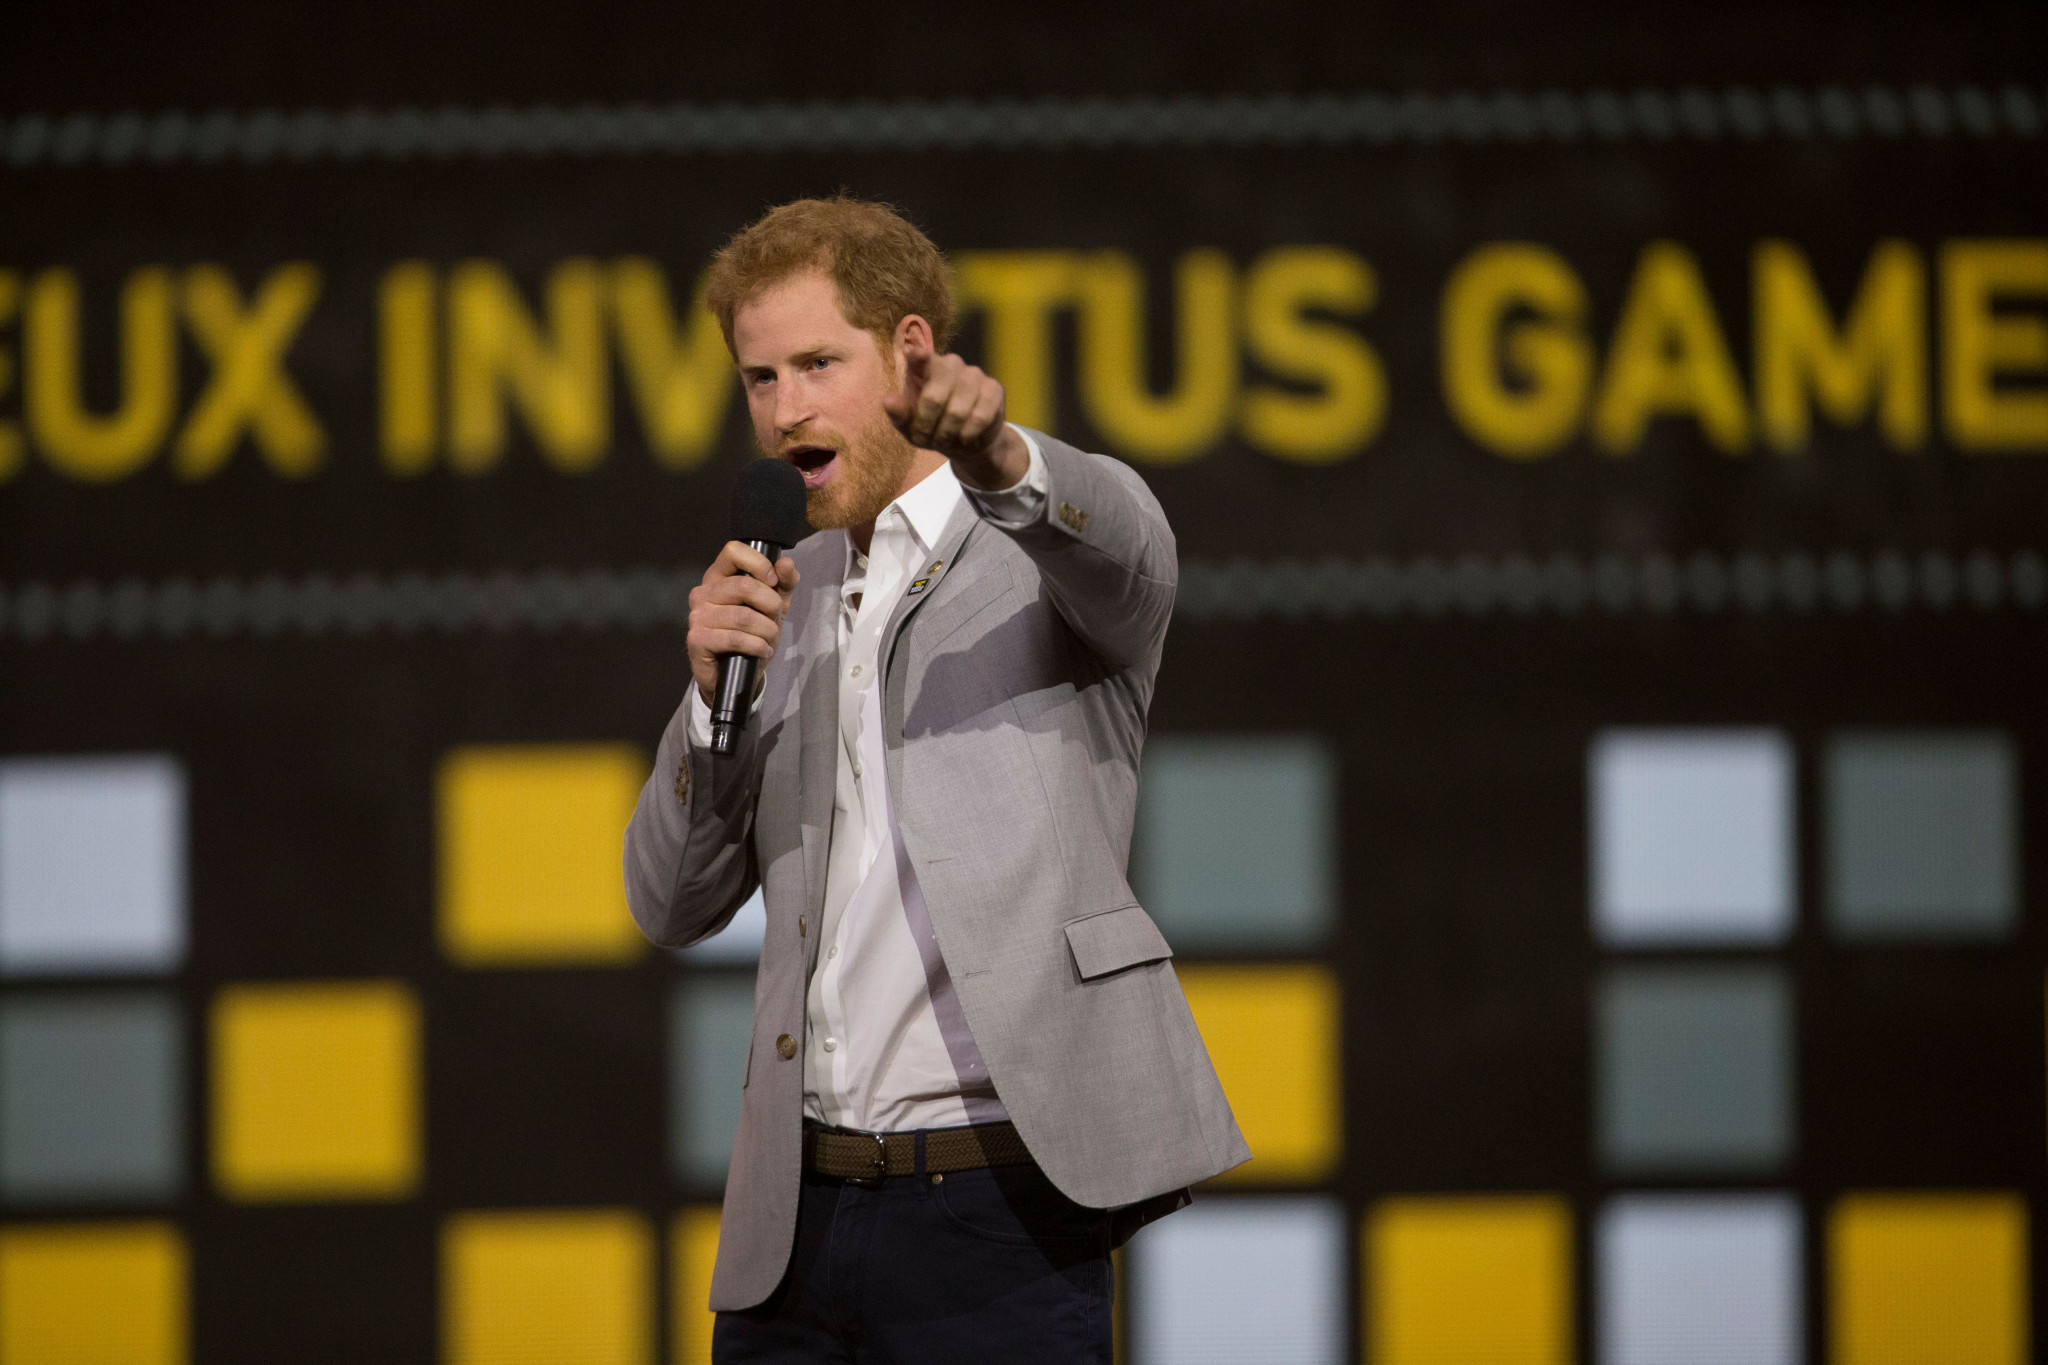 Prince Harry founded the Invictus Games in 2014 ©Getty Images